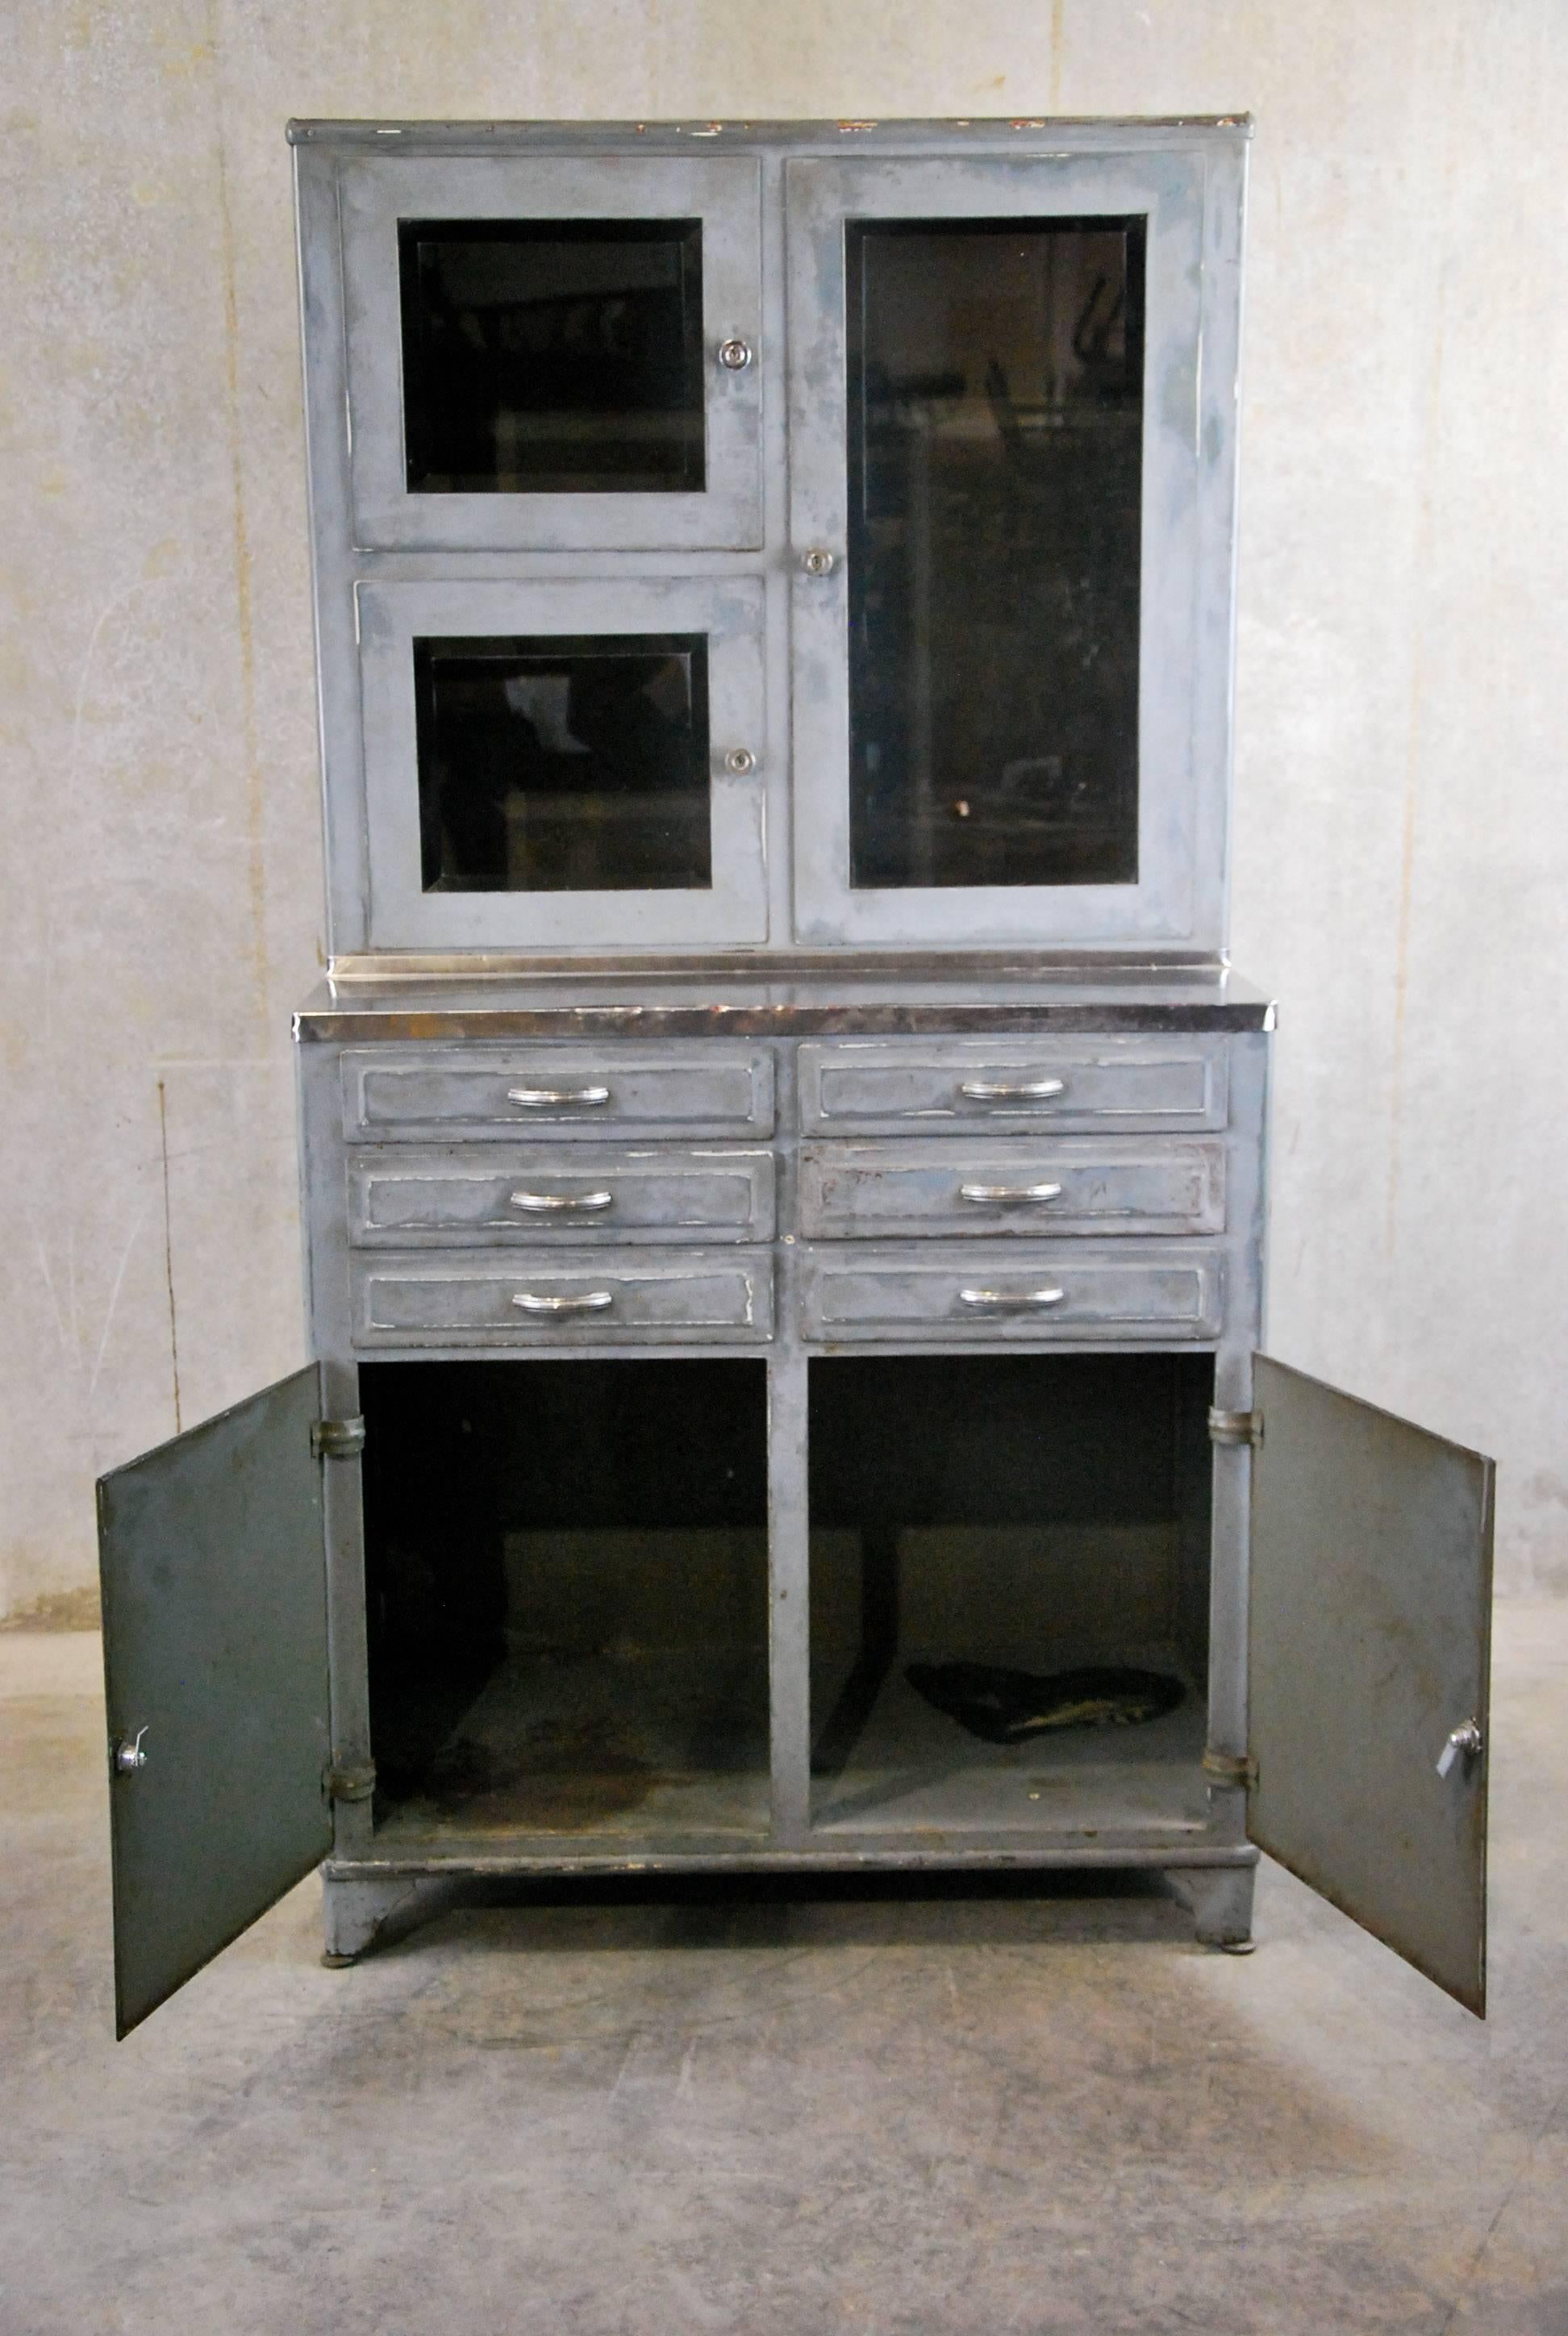 This well made piece retains an old painted surface over brushed metal with embossed drawers and doors. Feet are adjustable. Made in USA.
Complete with beveled glass doors and adjustable shelves, and stainless top.
Solid, clean and great simple